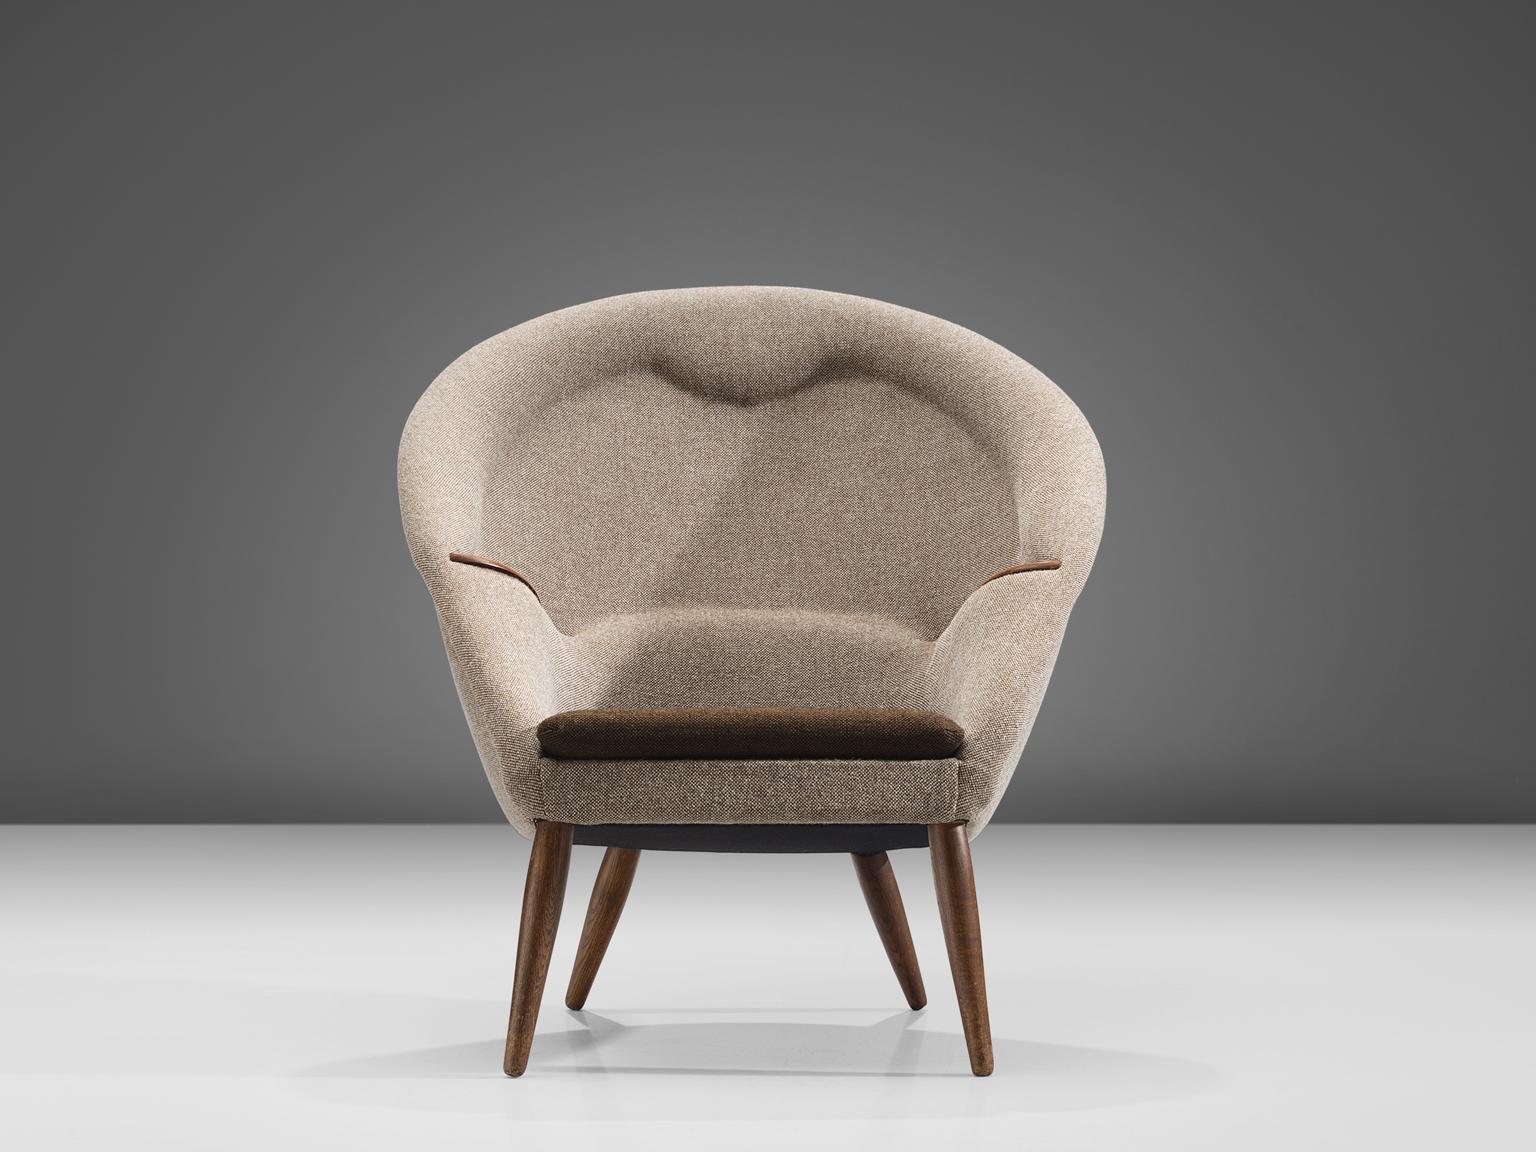 Nanna Ditzel, 'nursing' chair, Kvadrat Hallingdal brown and beige fabric and wood, Denmark, 1953.

This round and comfortable armchair is designed by Nanna Ditzel. The chair features four thick legs that become smaller towards the top and bottom.